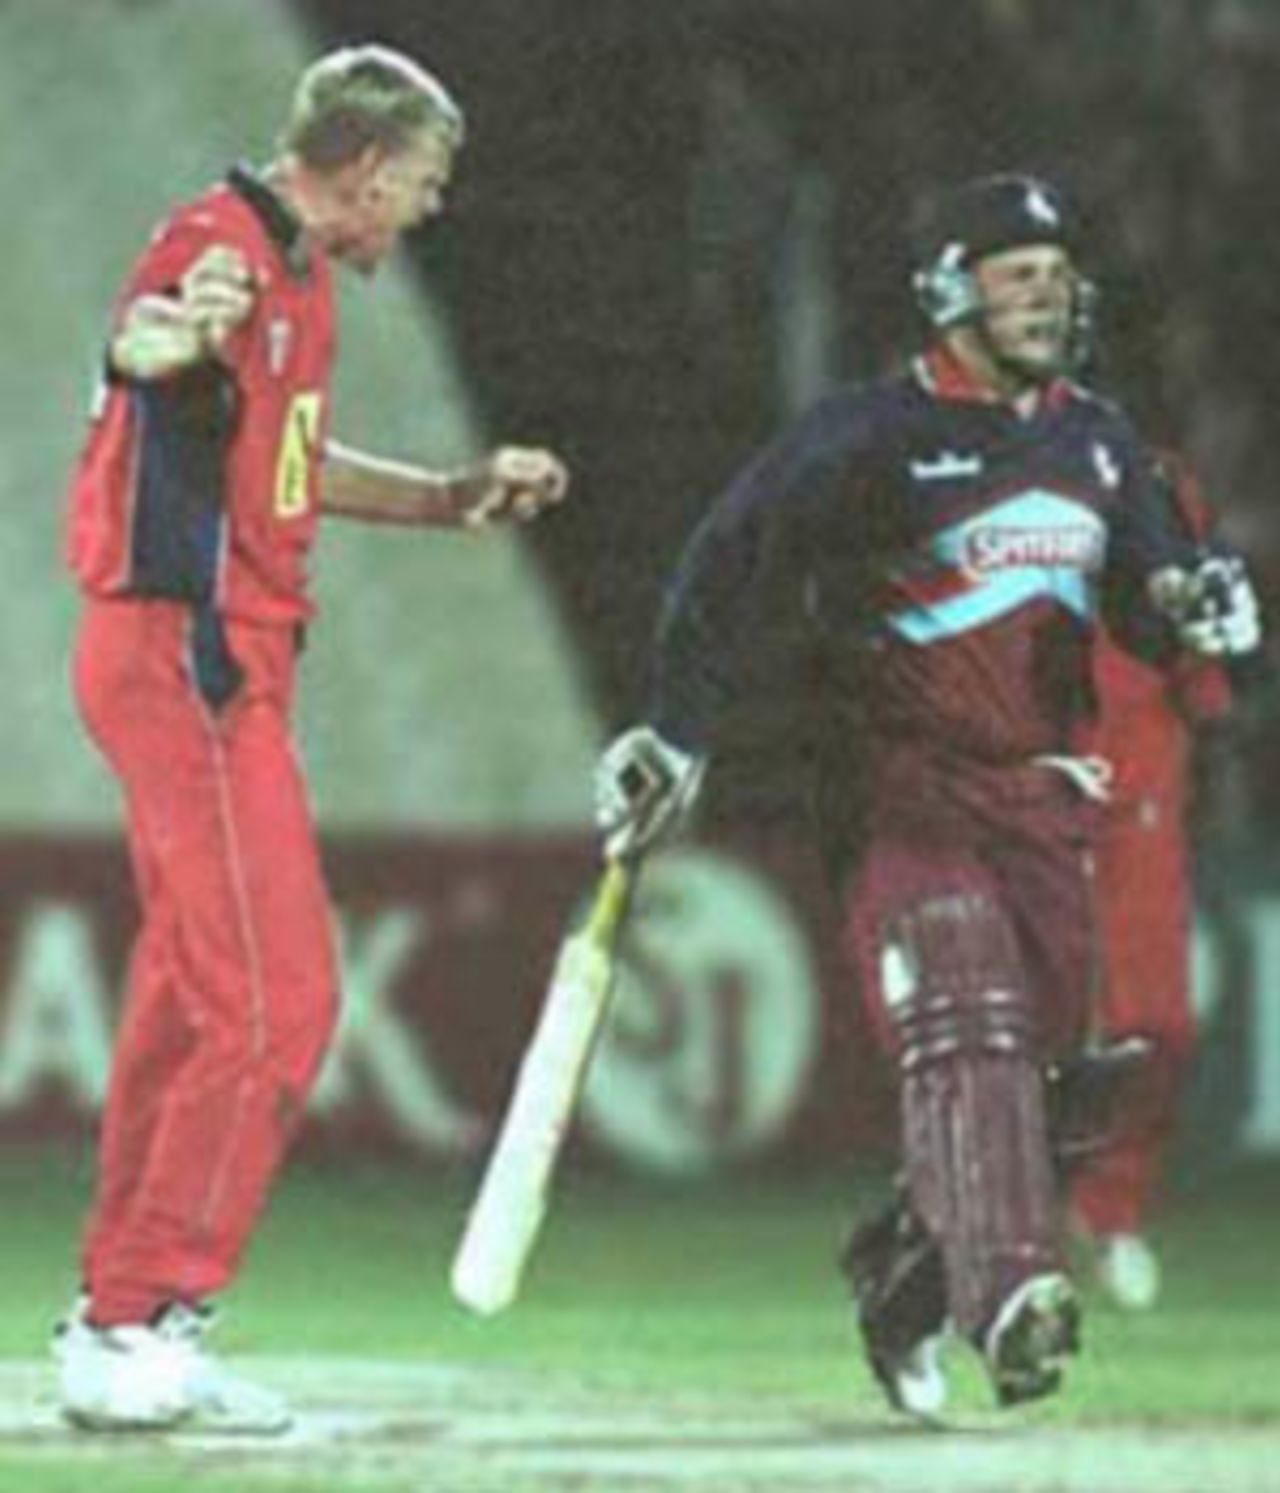 Peter Martin celebrates his return after injury with a wicket, National League Division One, 2000, Lancashire v Kent, Old Trafford, Manchester, 15 August 2000.